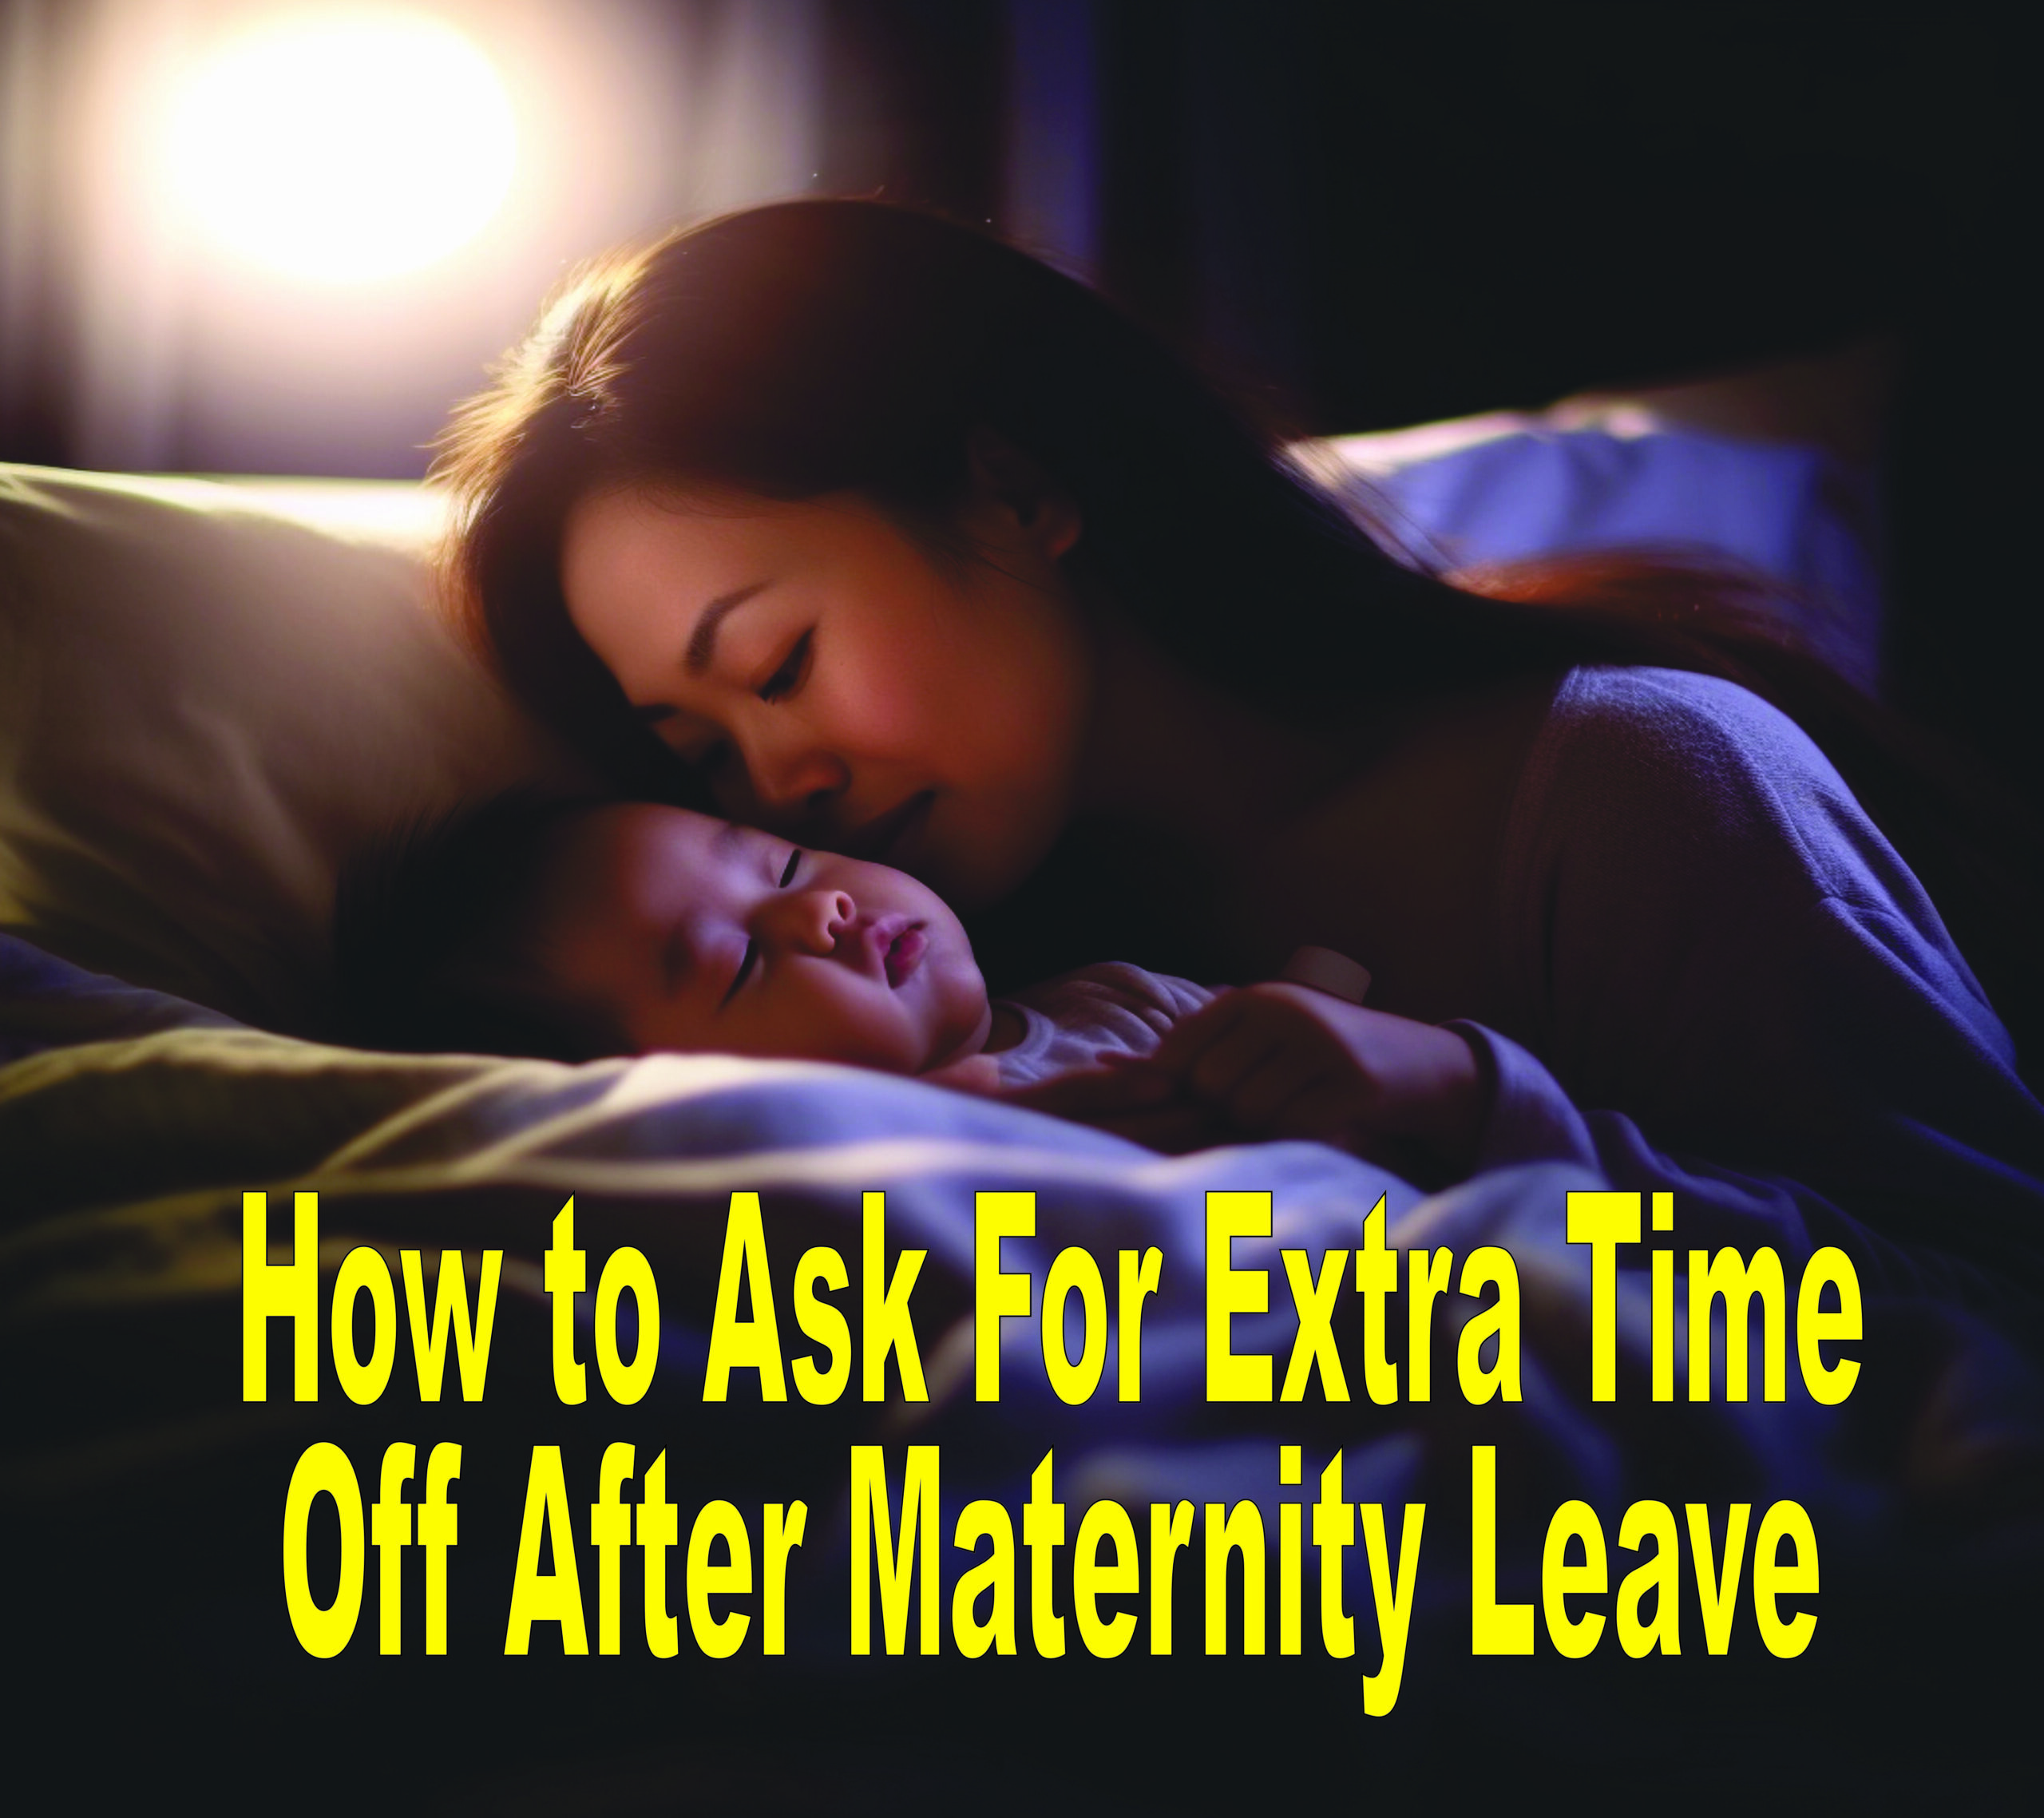 How To Ask For Extra Time Off After Maternity Leave